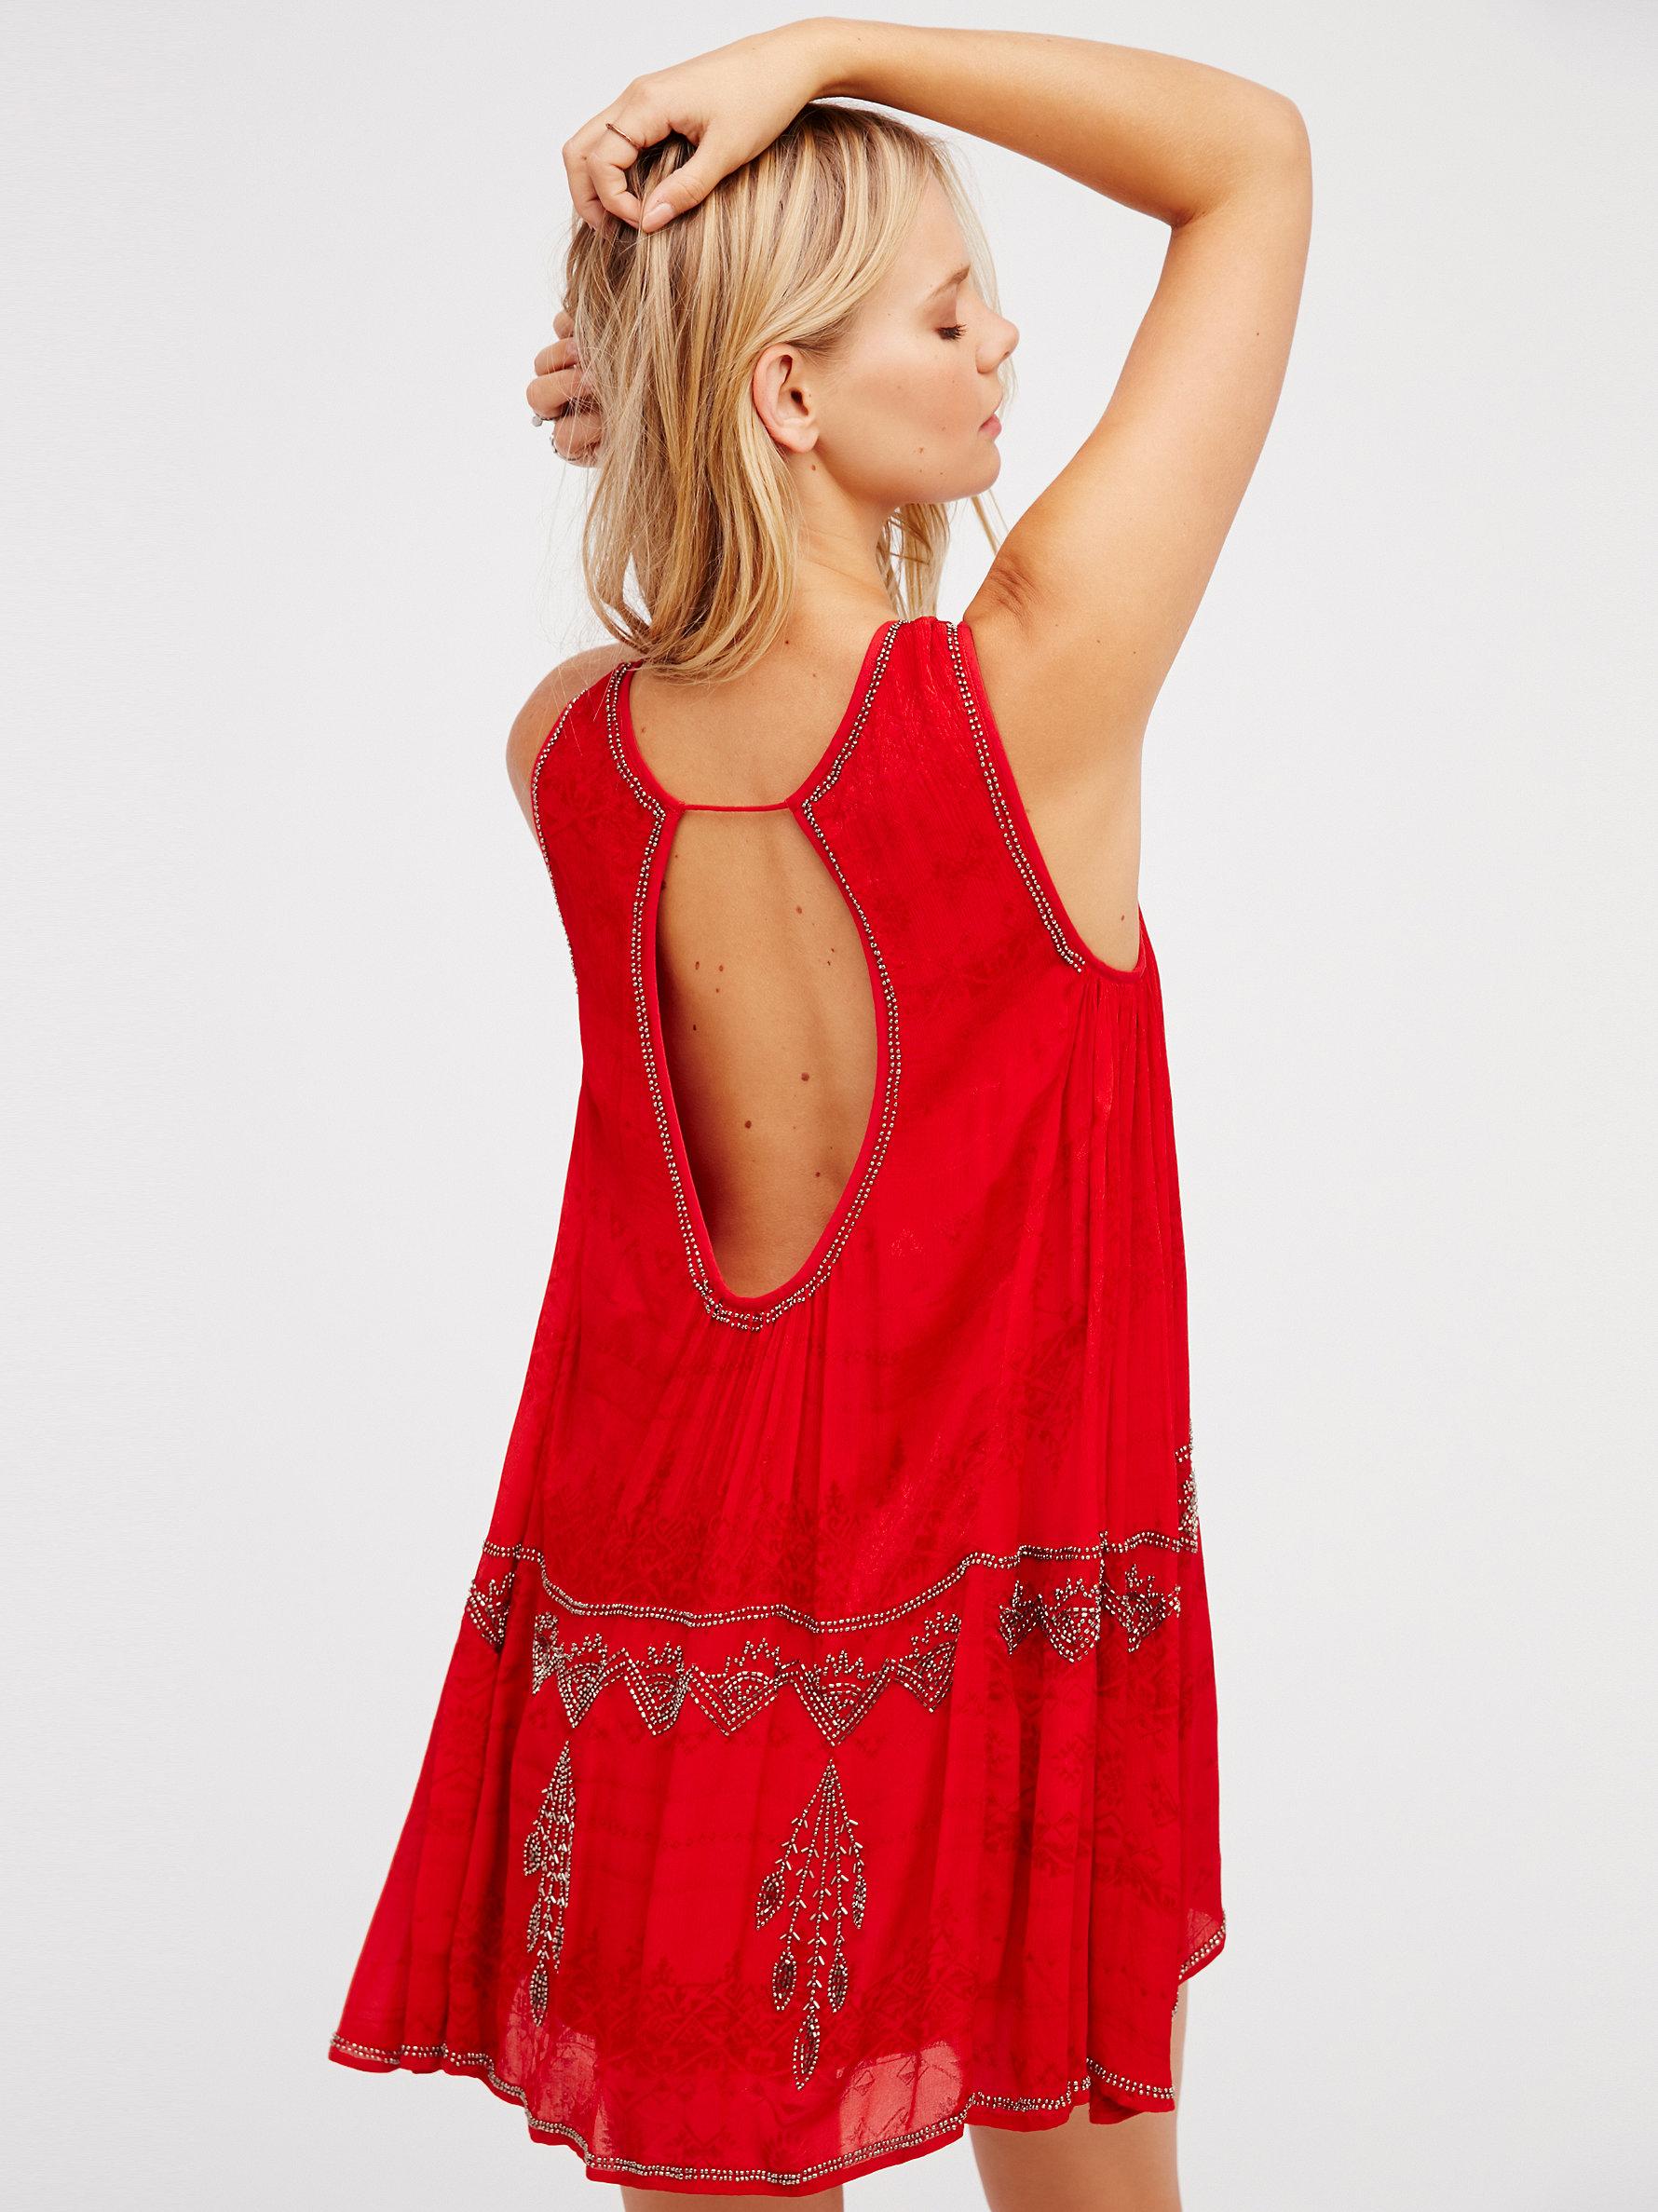 Lyst - Free People Delilah Mini Dress in Red